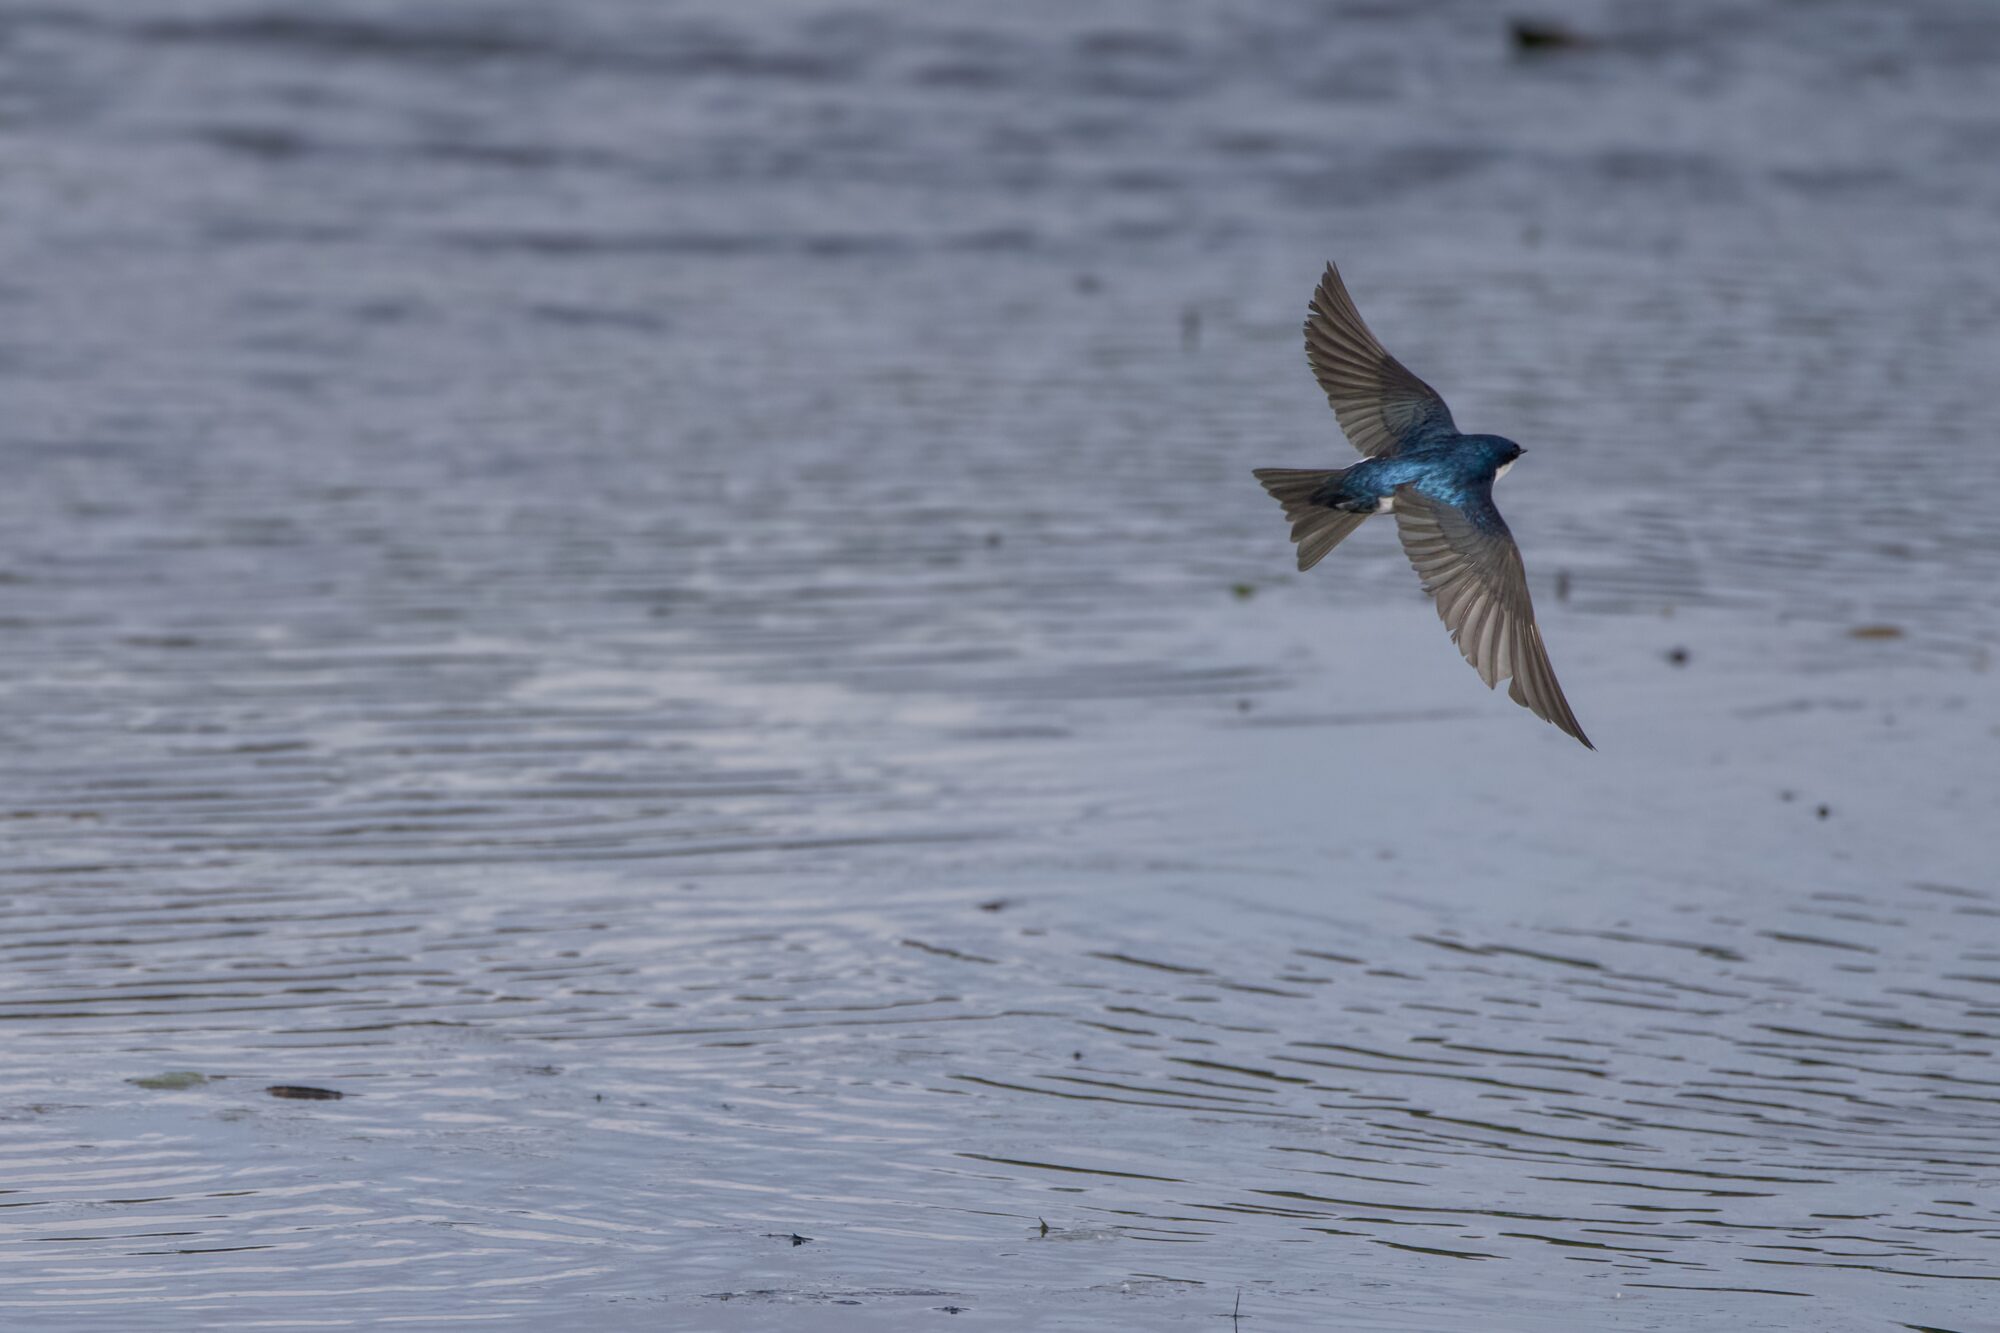 A Tree Swallow in flight over water, banking hard. We see its shiny blue back and good detail on its grey flight feathers